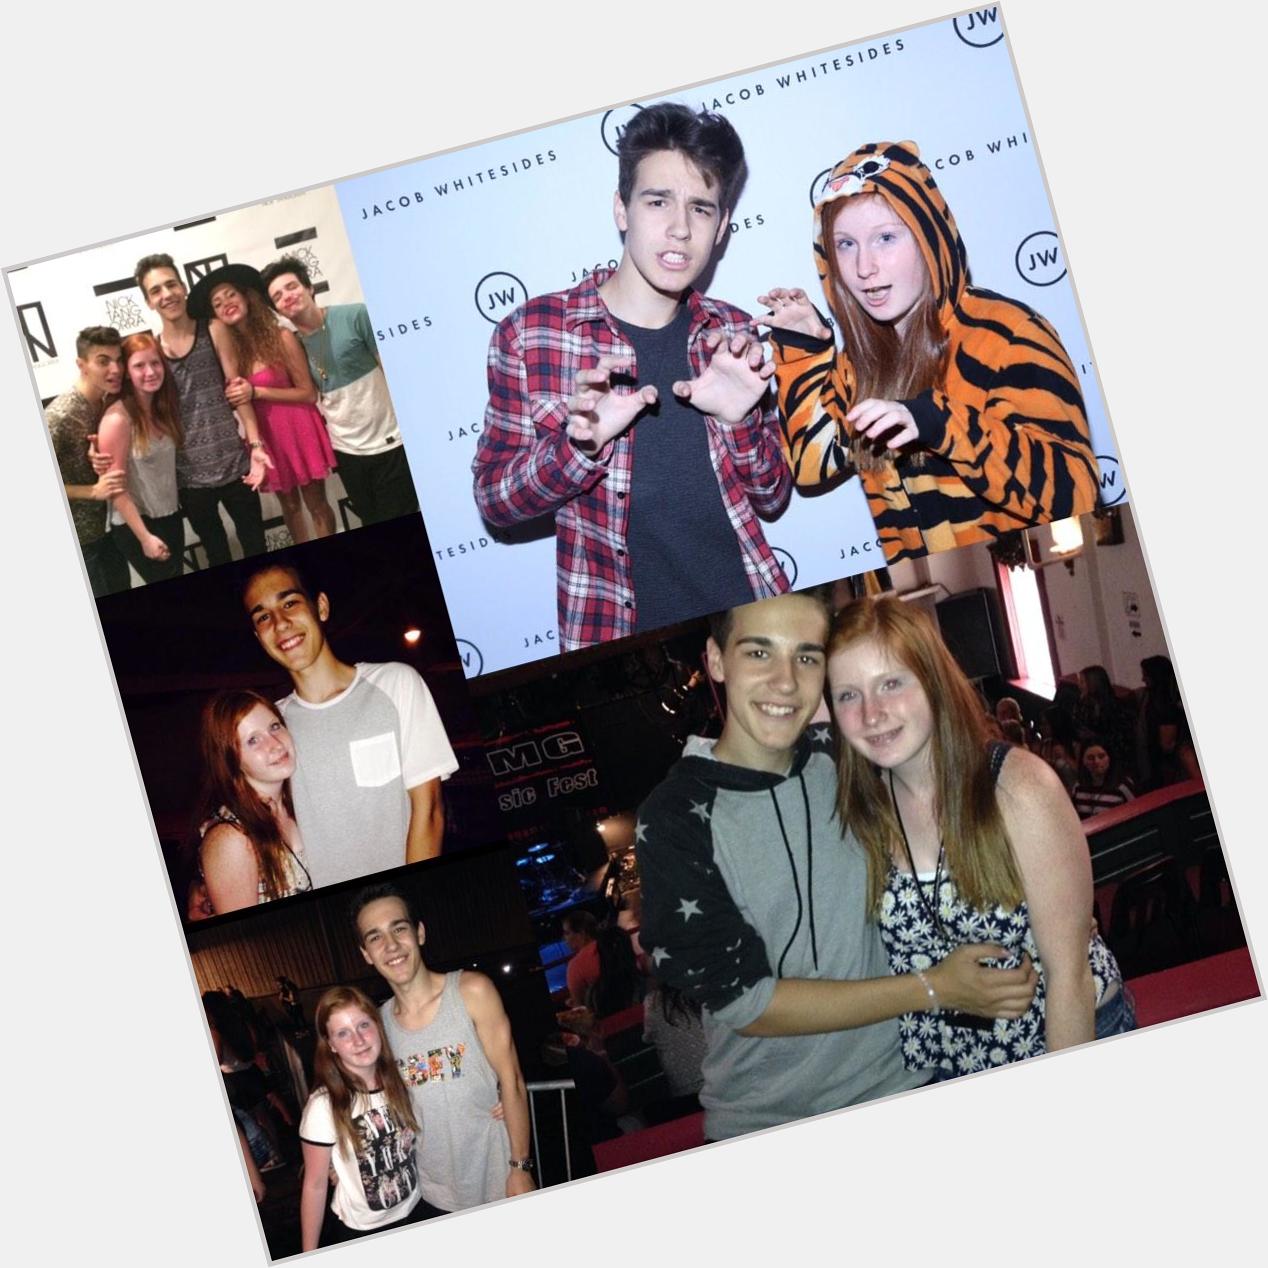 Happy 17th Birthday to the love of my life, Jacob Whitesides. I love you so much and I cant wait to see you later  